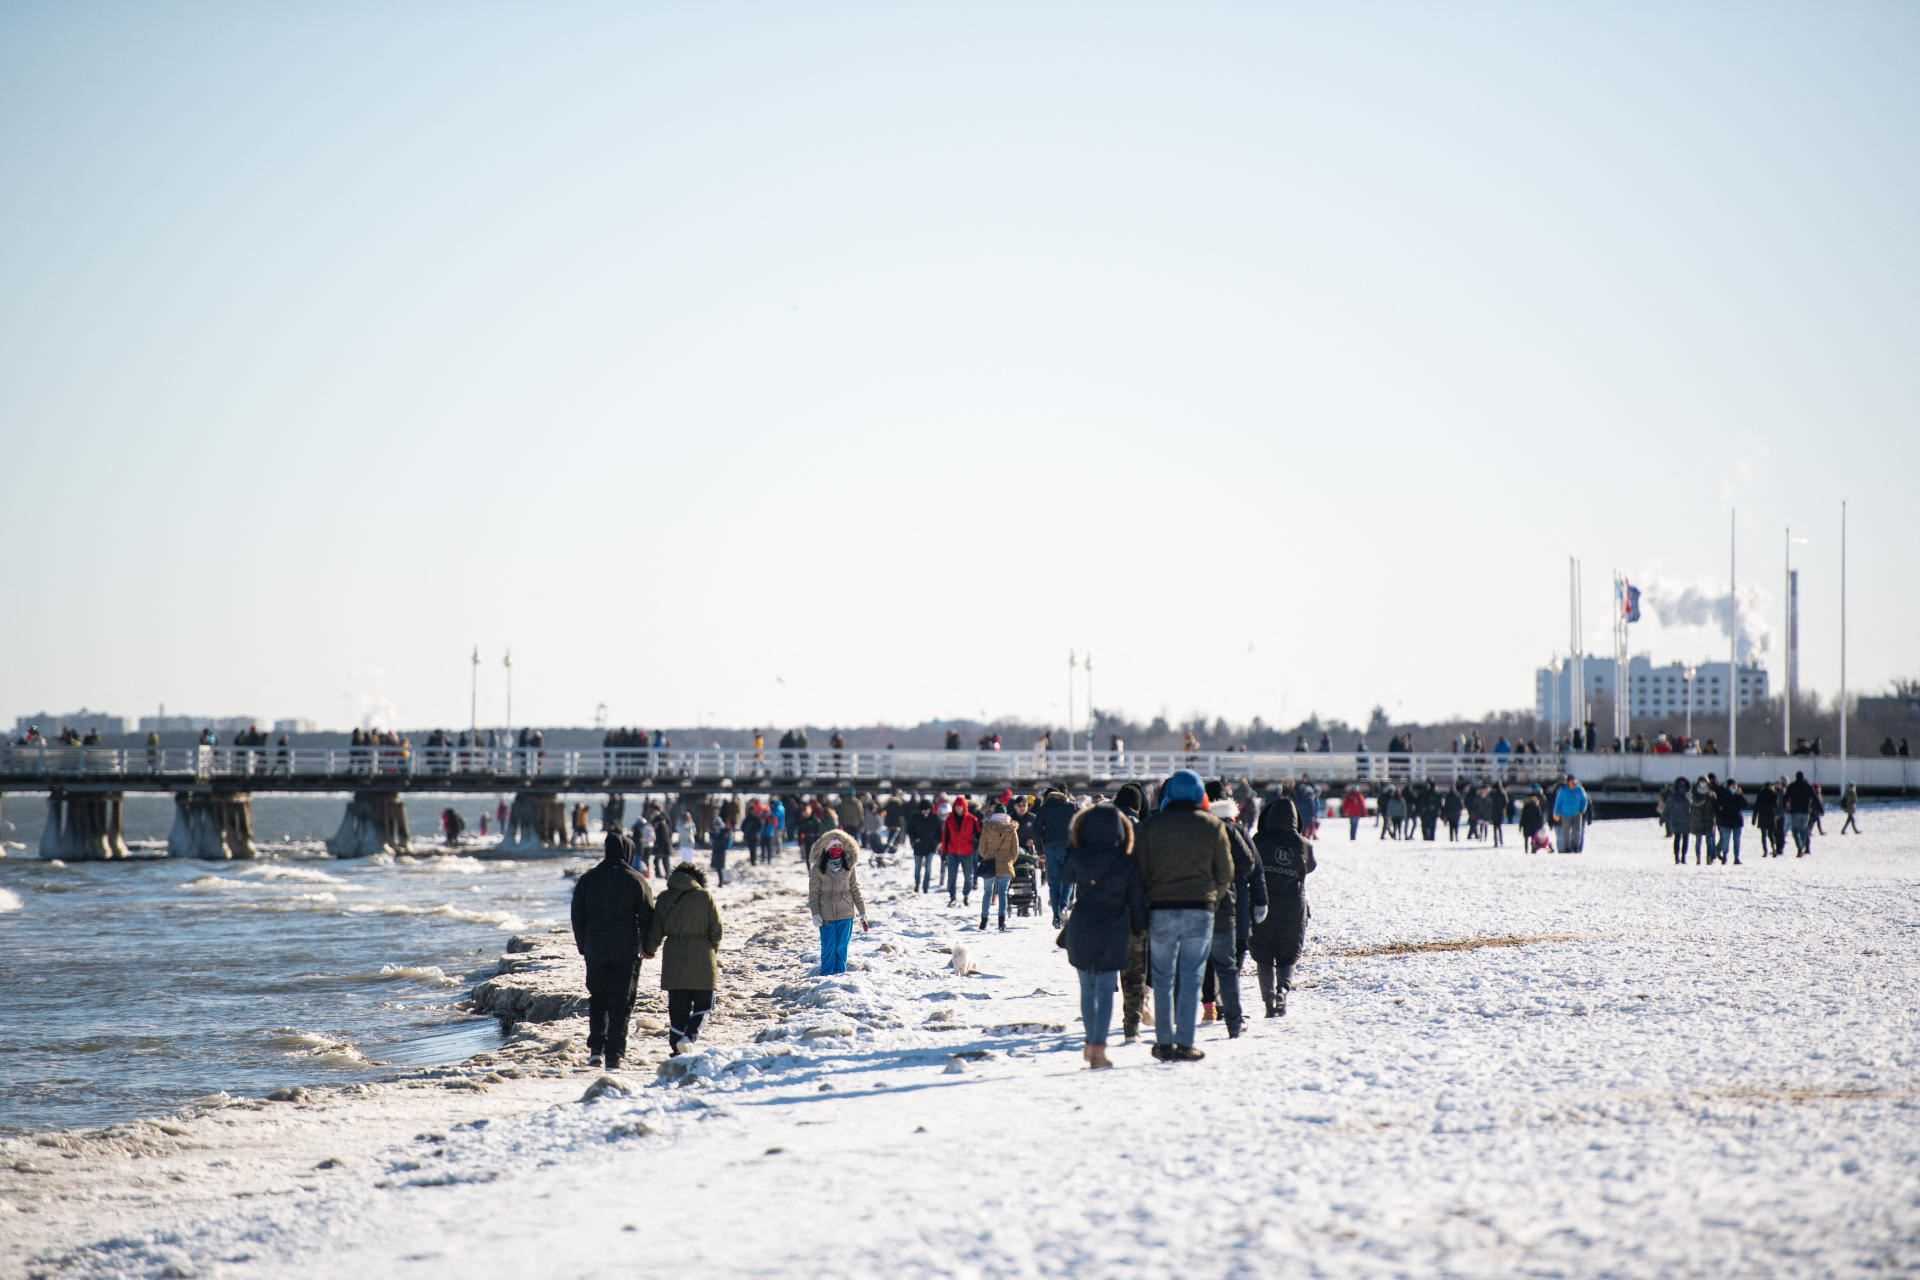 With the reopening of the tourist sector in Poland, the frequentation of the frozen beaches of the Baltic Sea, as in Sopot on February 14, is very important.  Here hotels now have the right to accommodate tourists at 50% of their capacity.